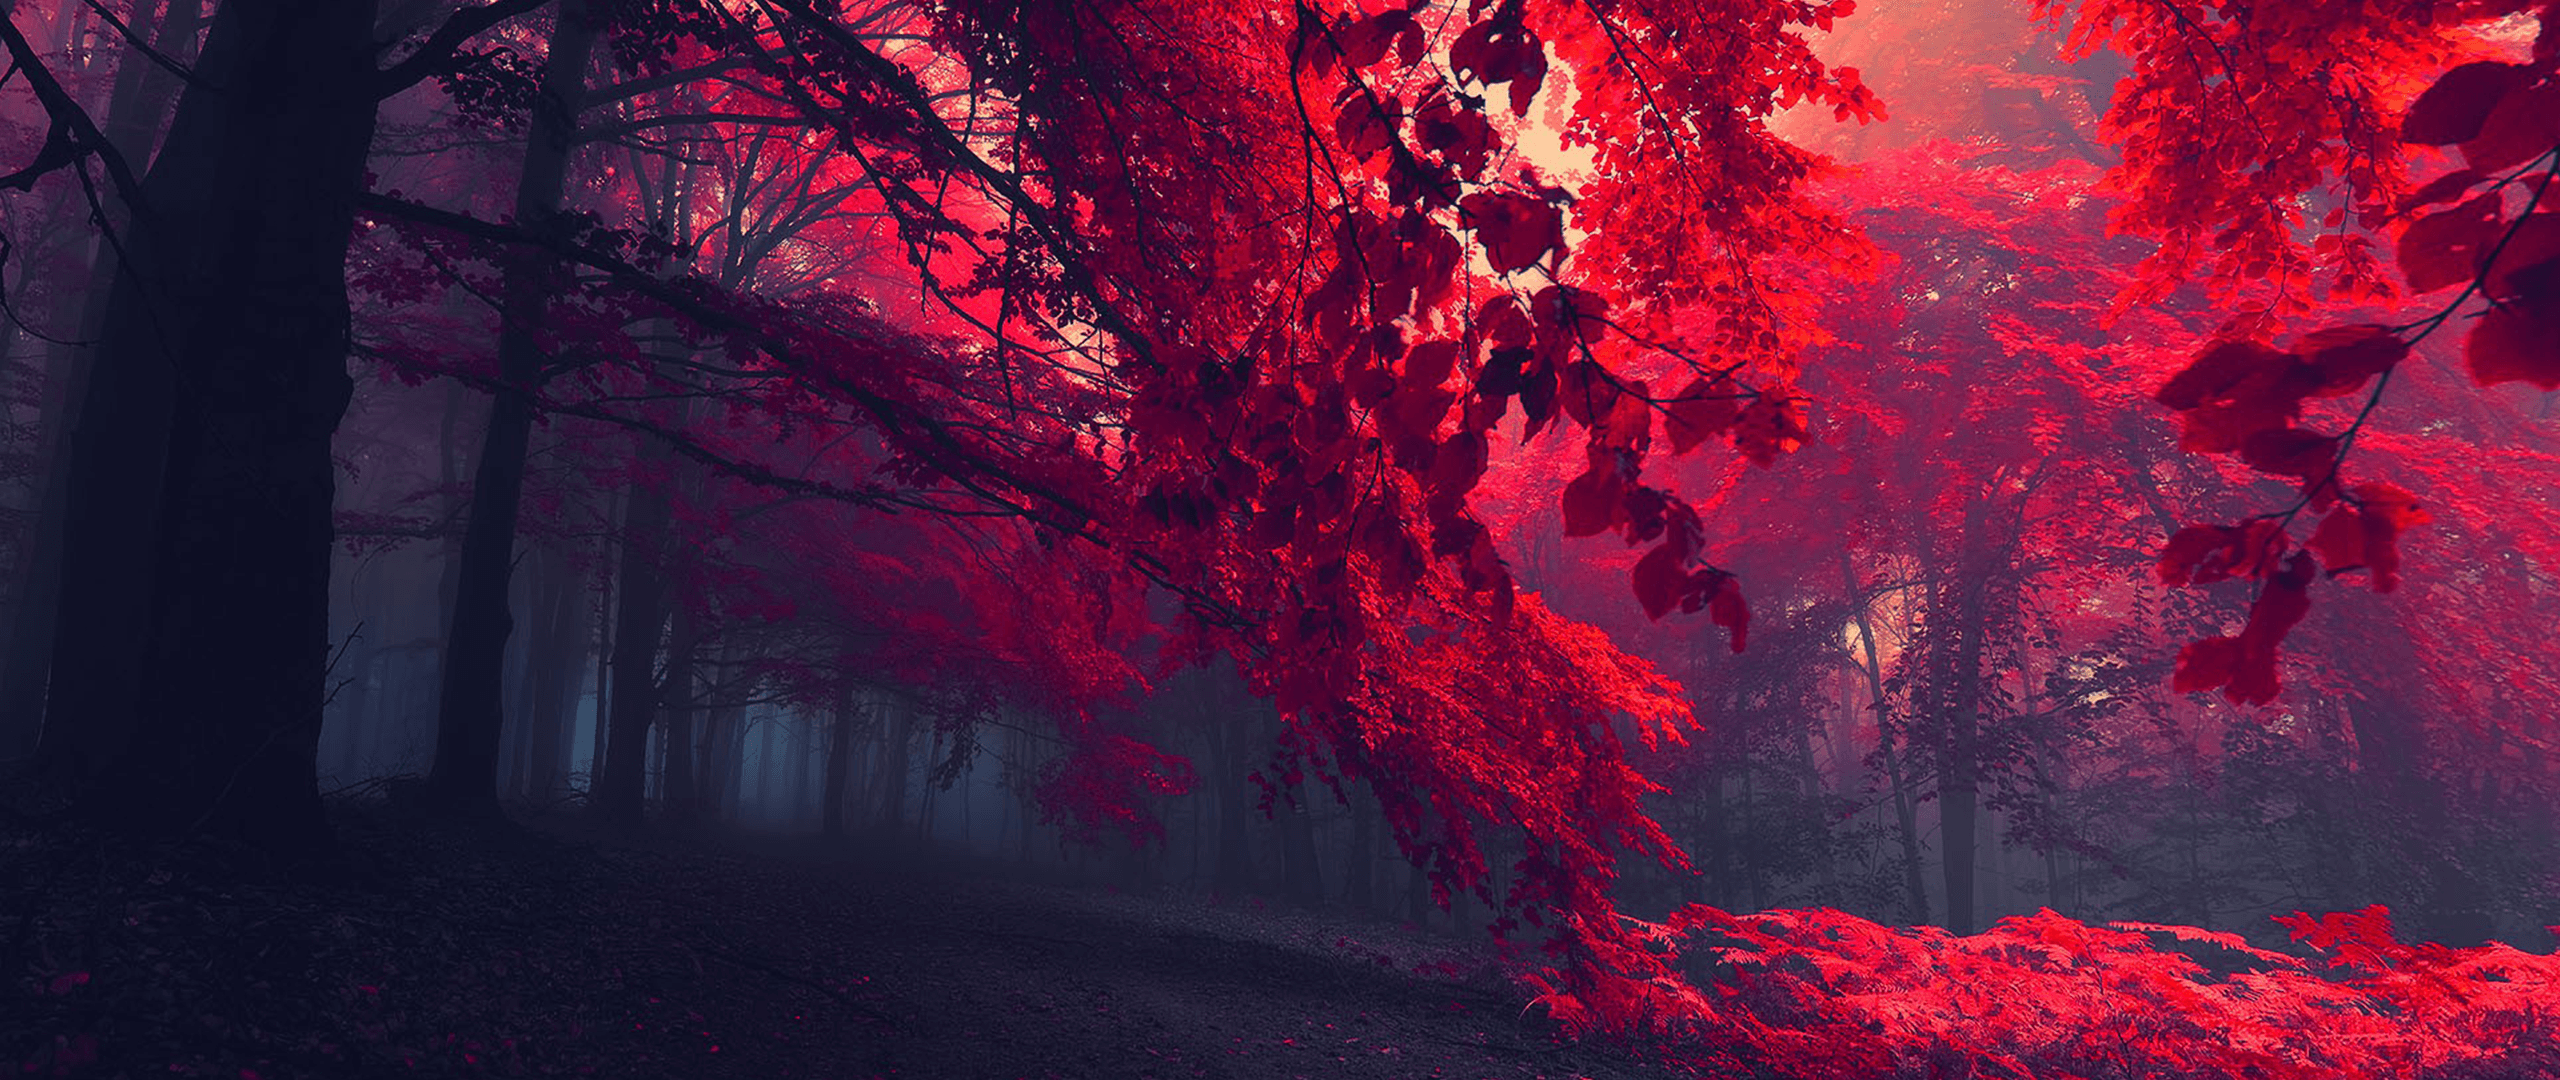 Wallpaper, sunlight, forest, nature, red, photography, texture